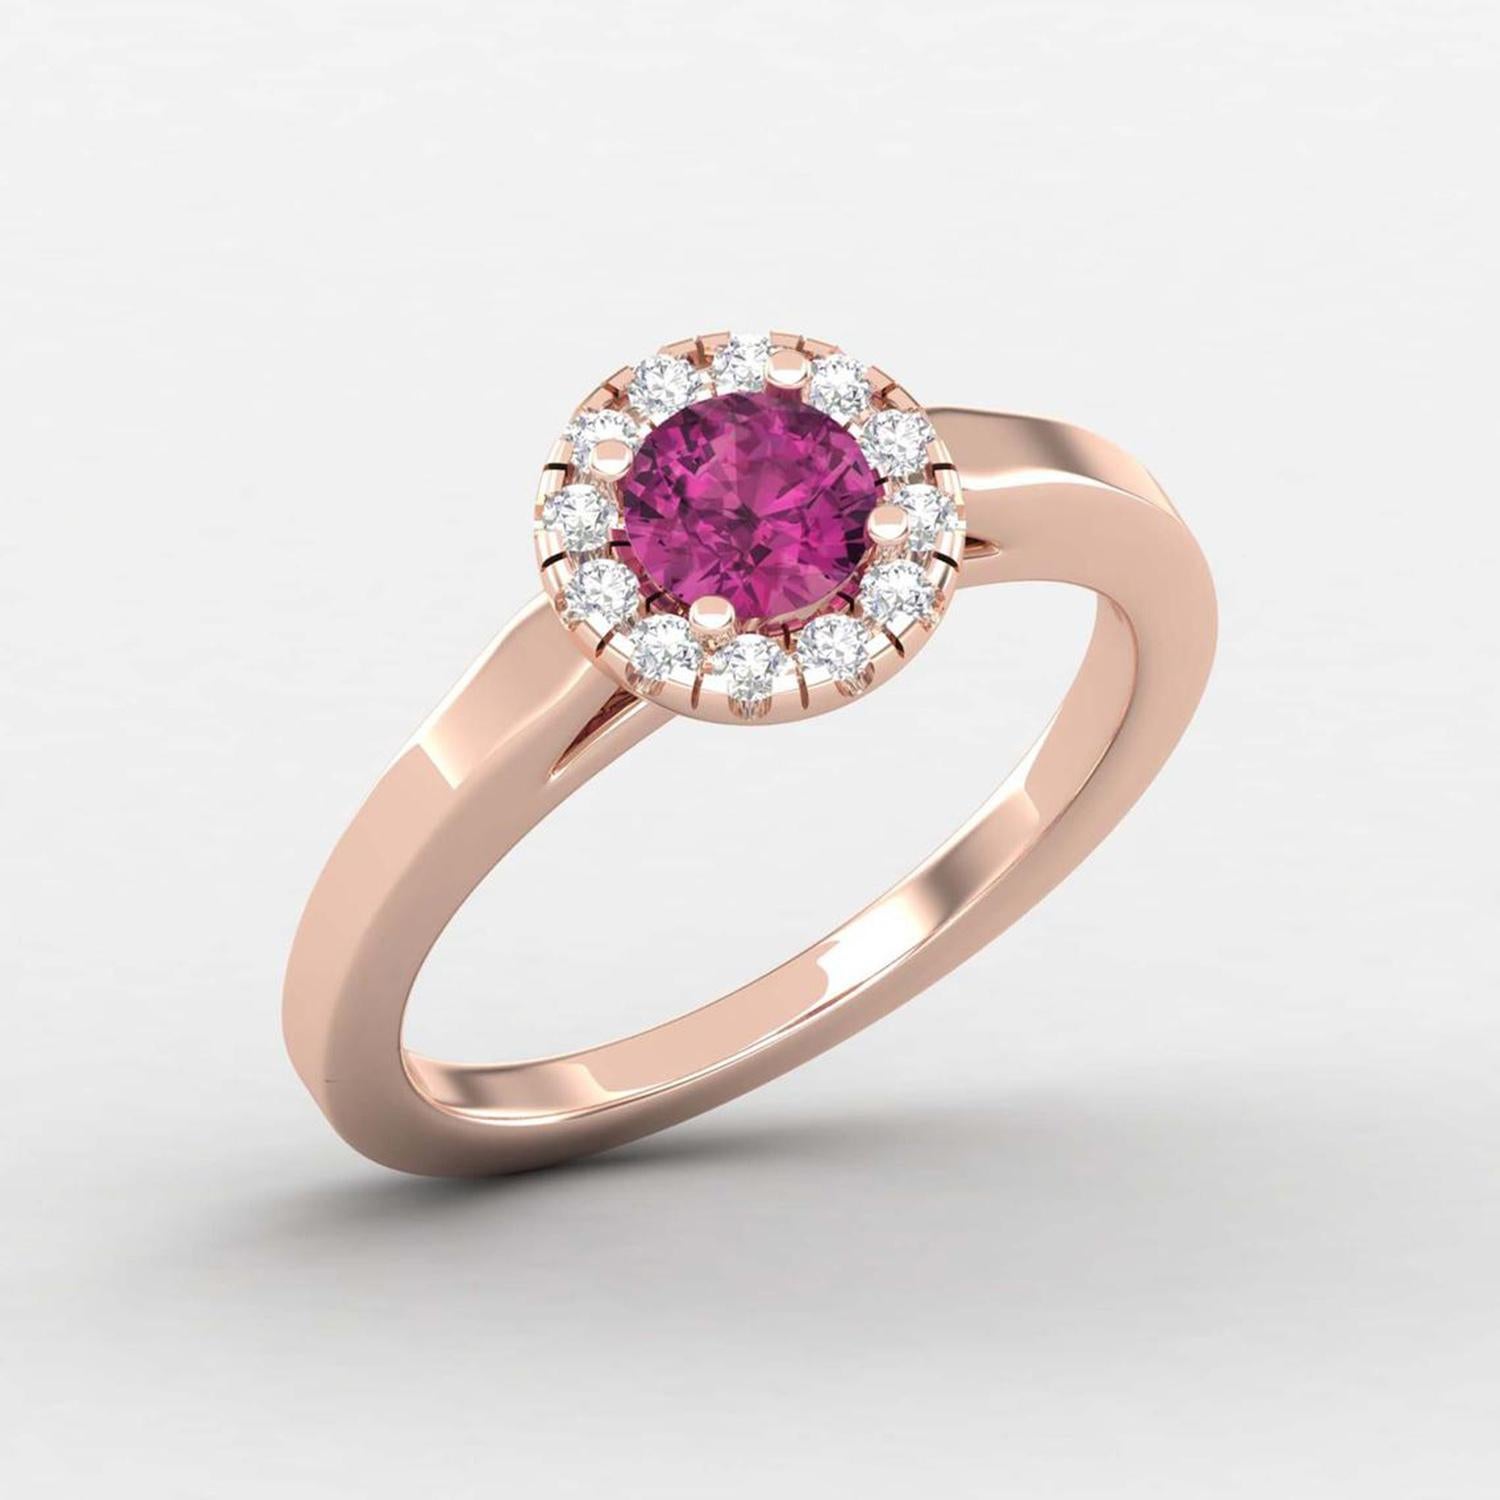 Round Cut 14 Karat Gold Pink Tourmaline Ring / Diamond Solitaire Ring / Ring for Her For Sale